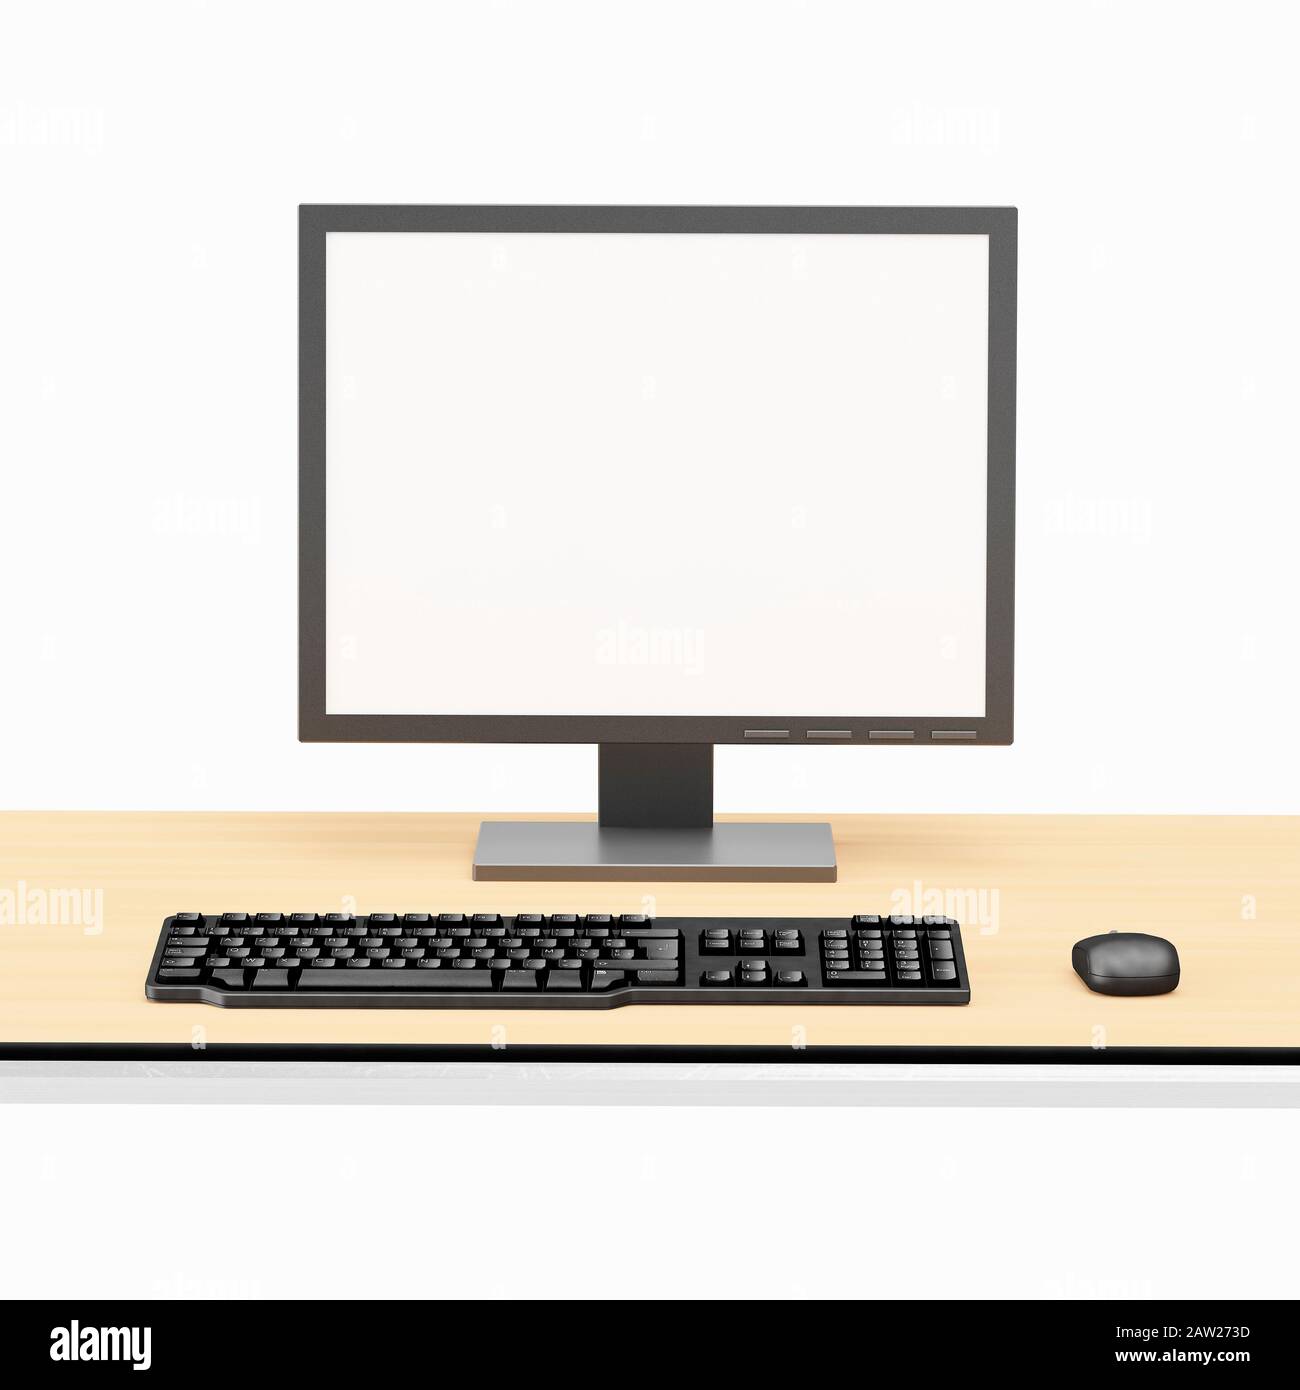 Blank computer screen, keyboard and mouse on an office desk Stock Photo